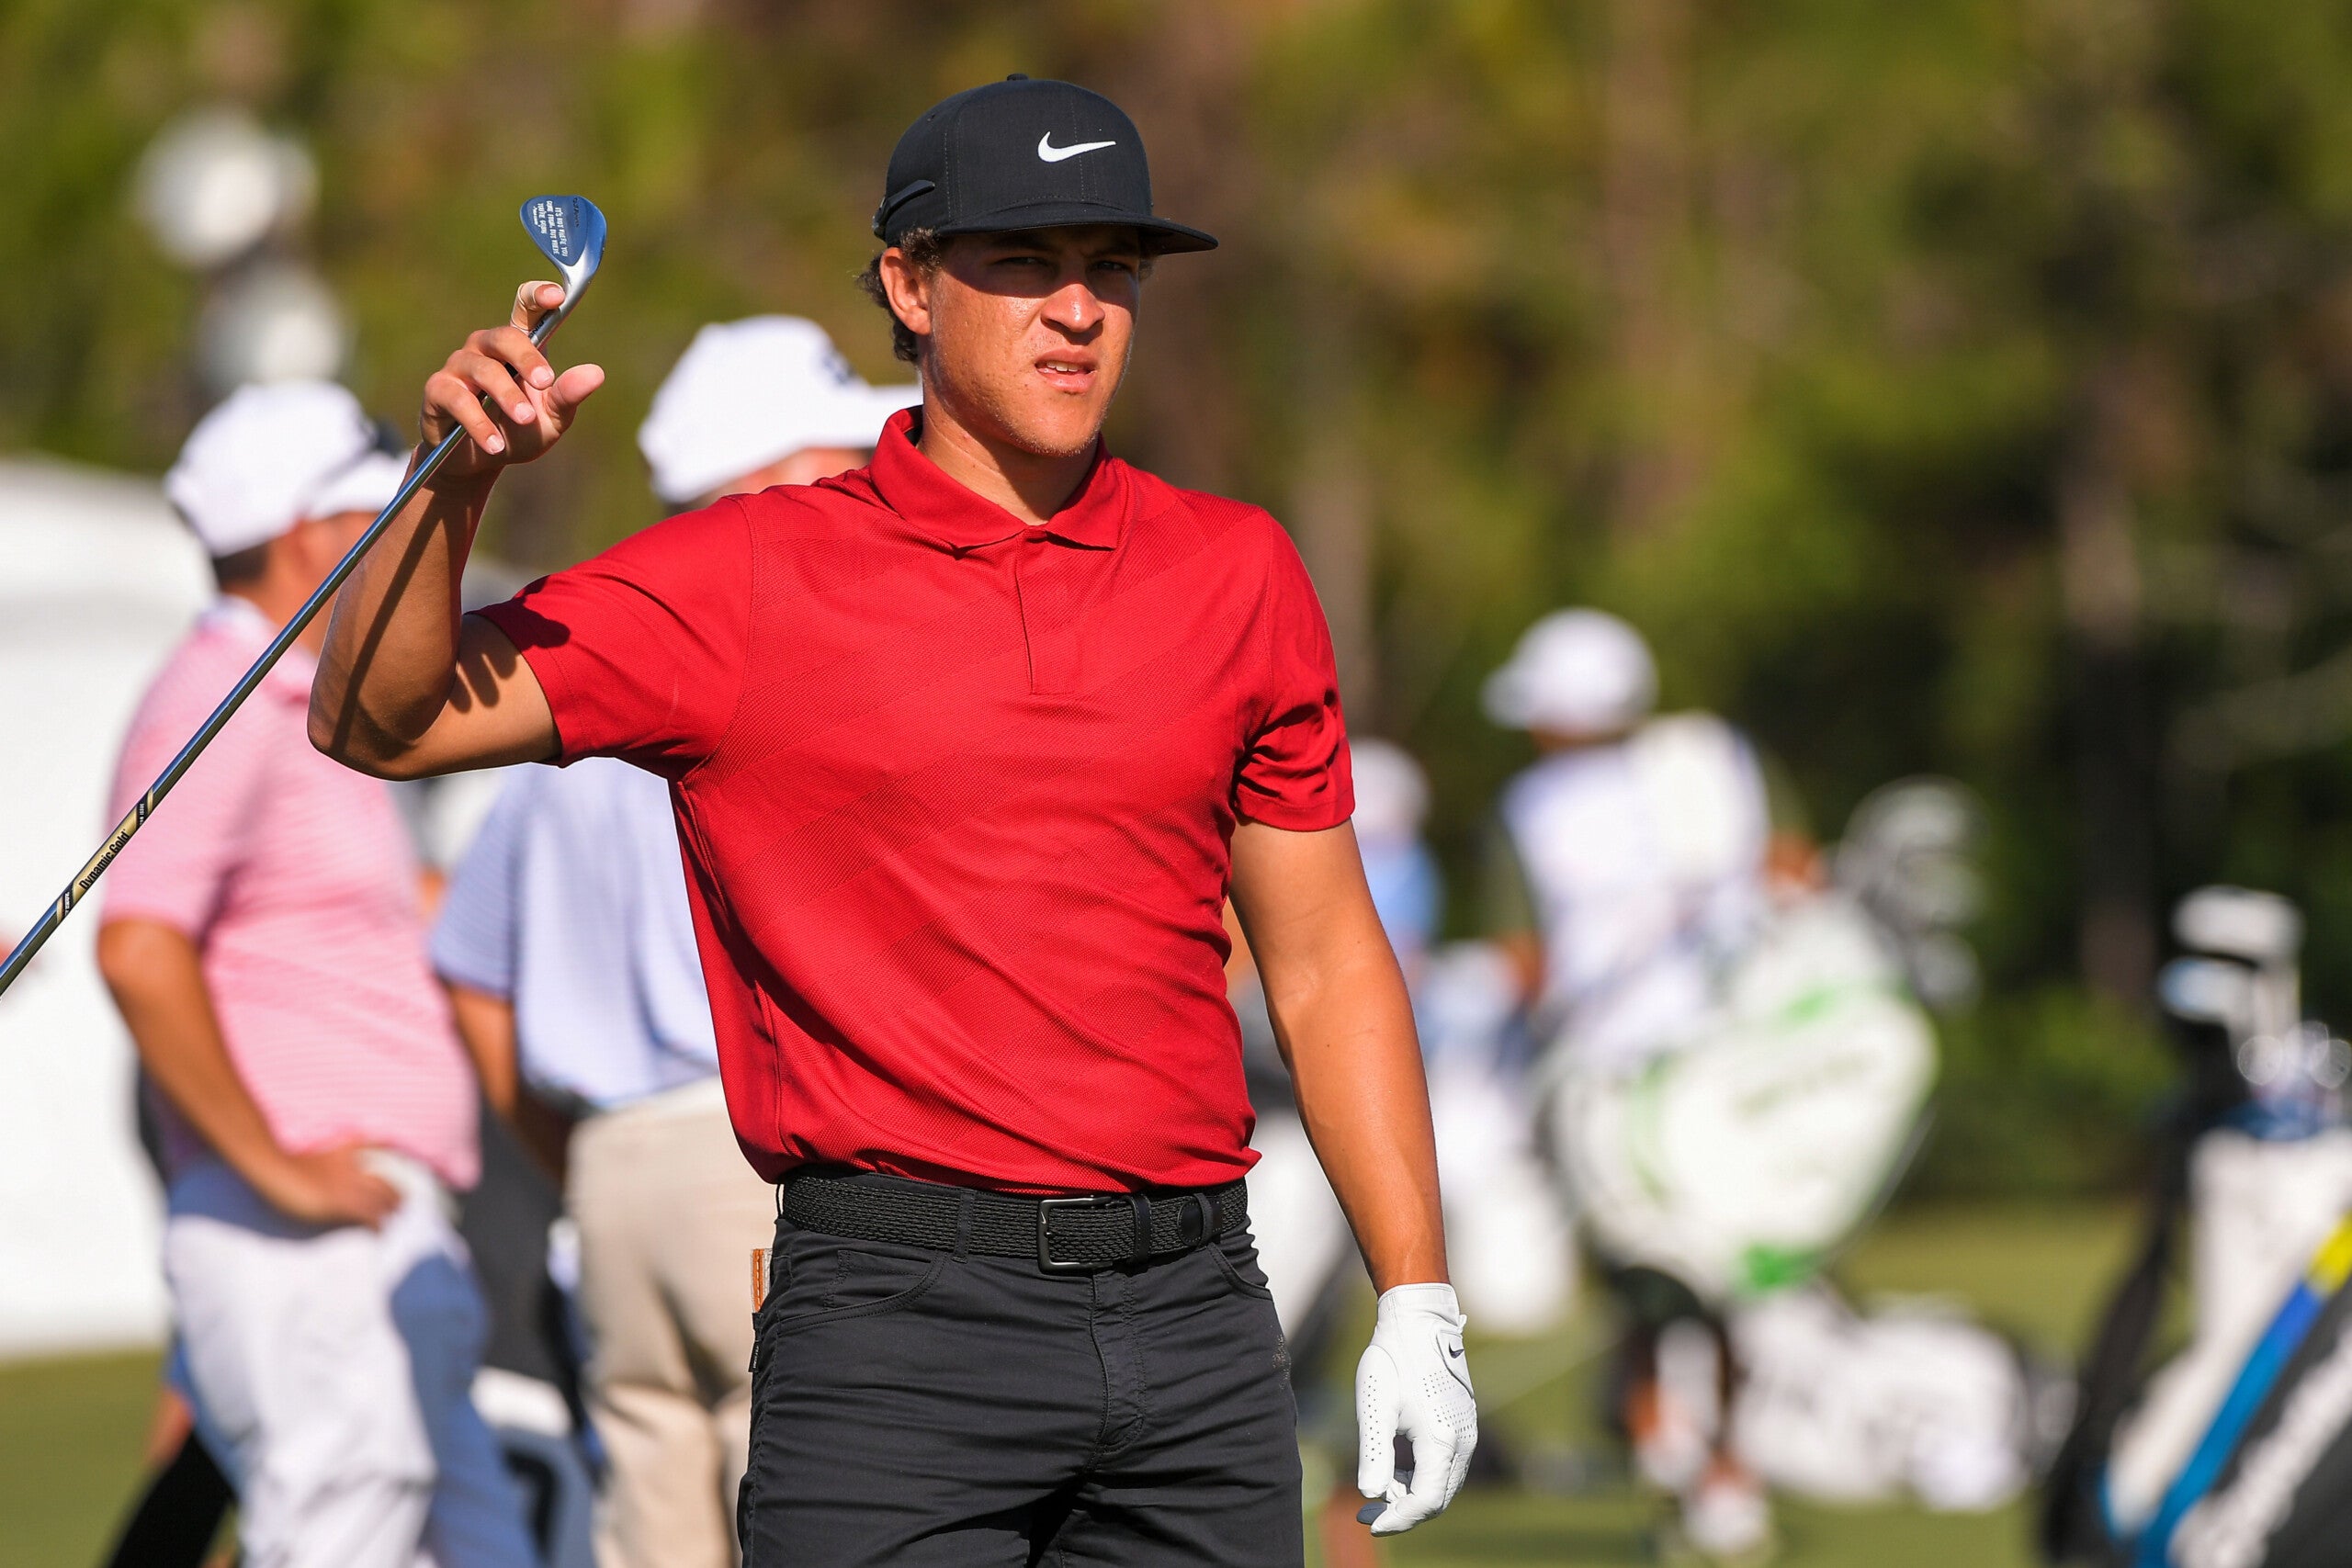 Golfers wore red and black in honor of Tiger Woods during Sunday's play ...